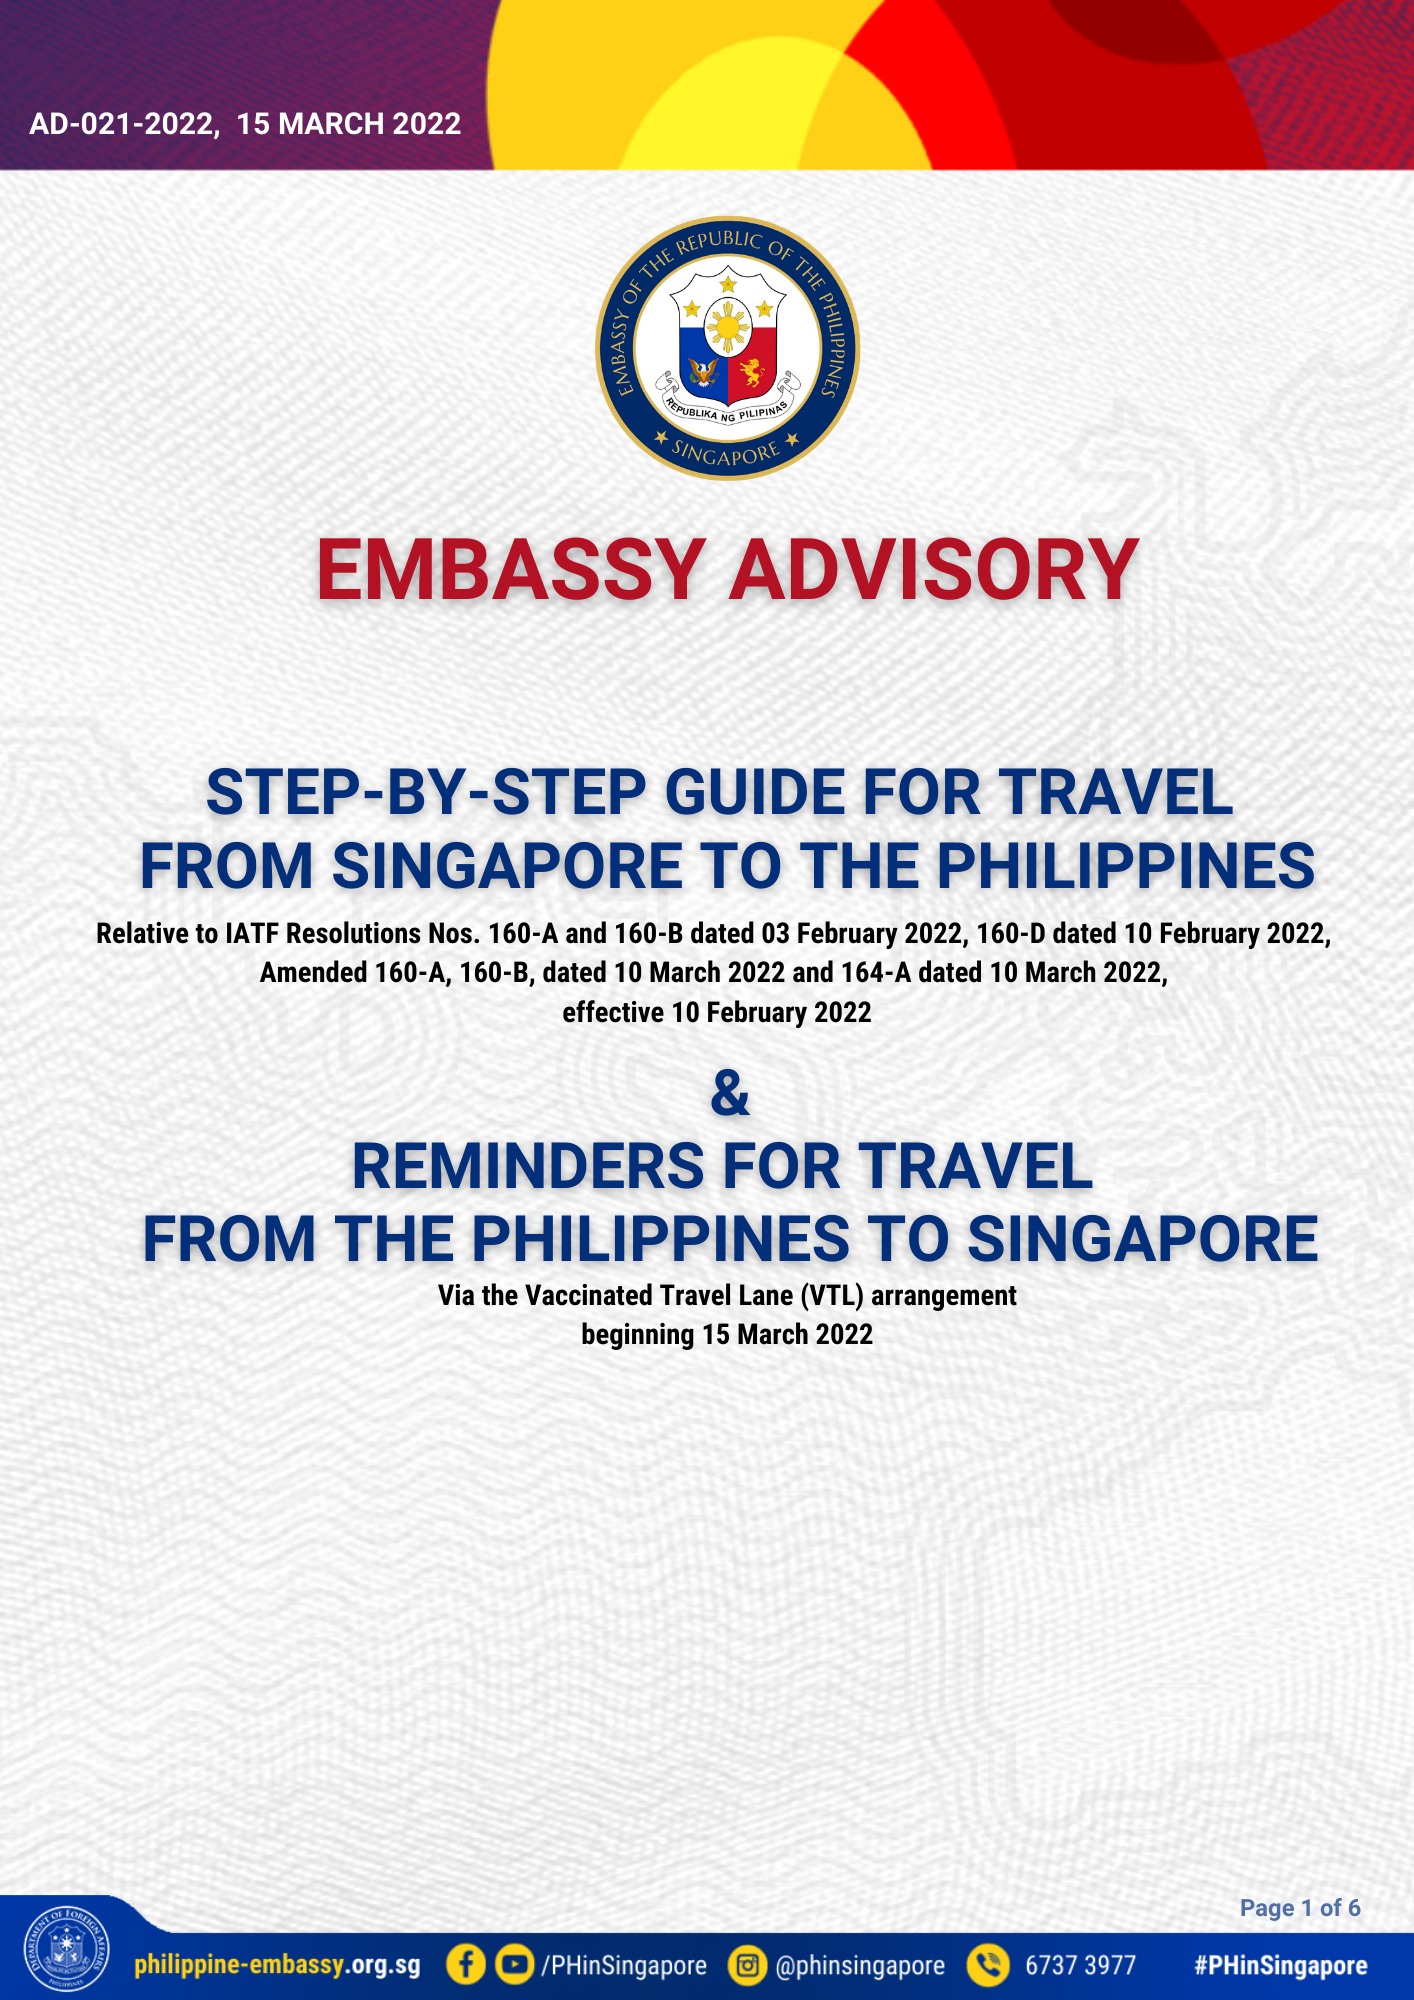 The Philippines Reopens To All Fully Vaccinated Tourists - ph to sg, sg to ph regulations n vaccinated travel lane